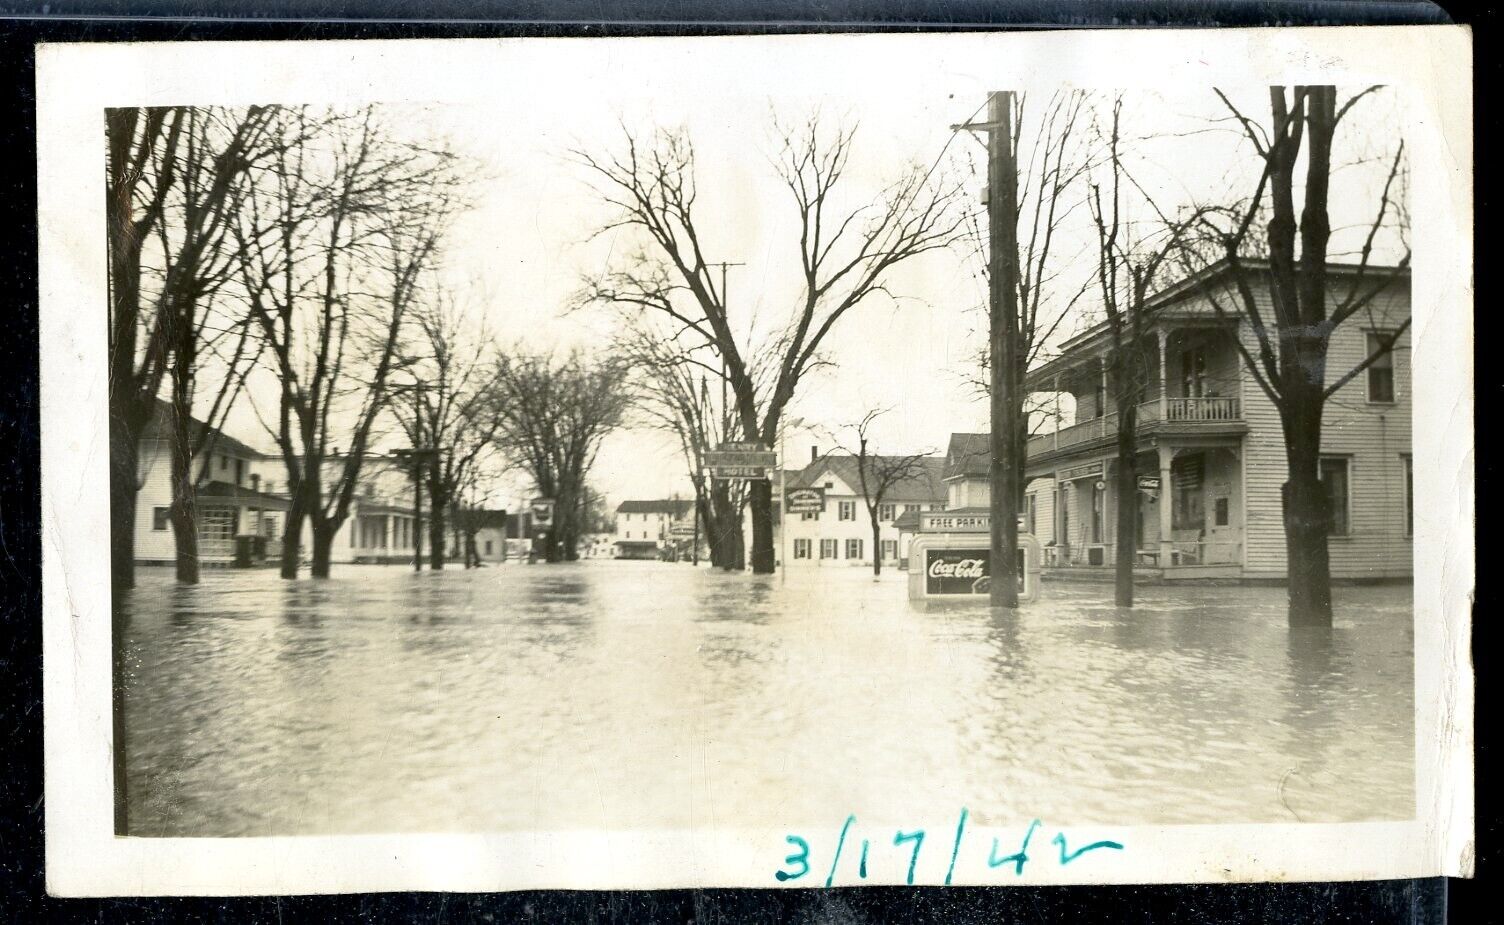 Vintage Photo HENRY HOTEL DETROIT AREA COCA COLA SIGN IN FLOOD WATERS 1942